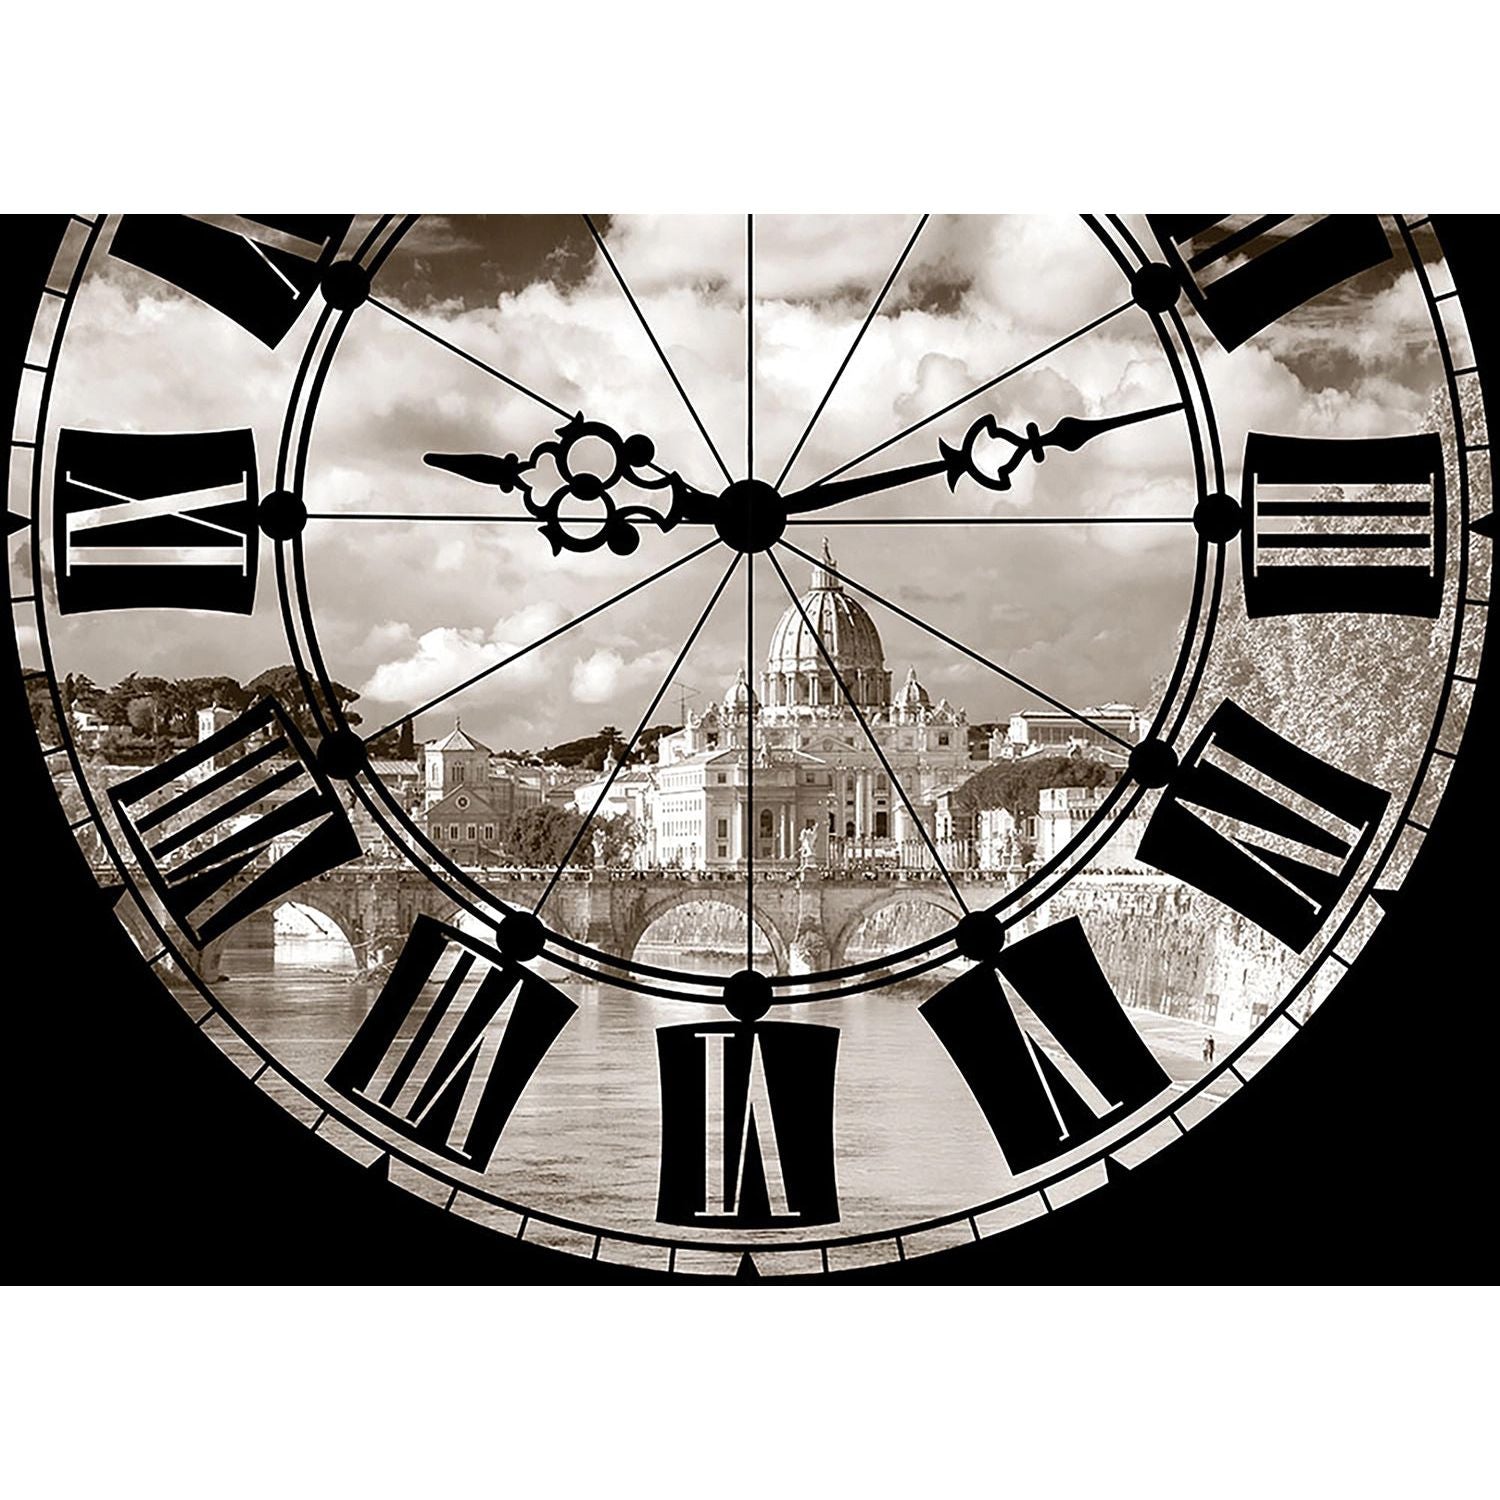 Timeless Urban Perspective: City View from Big Clock Wall Mural